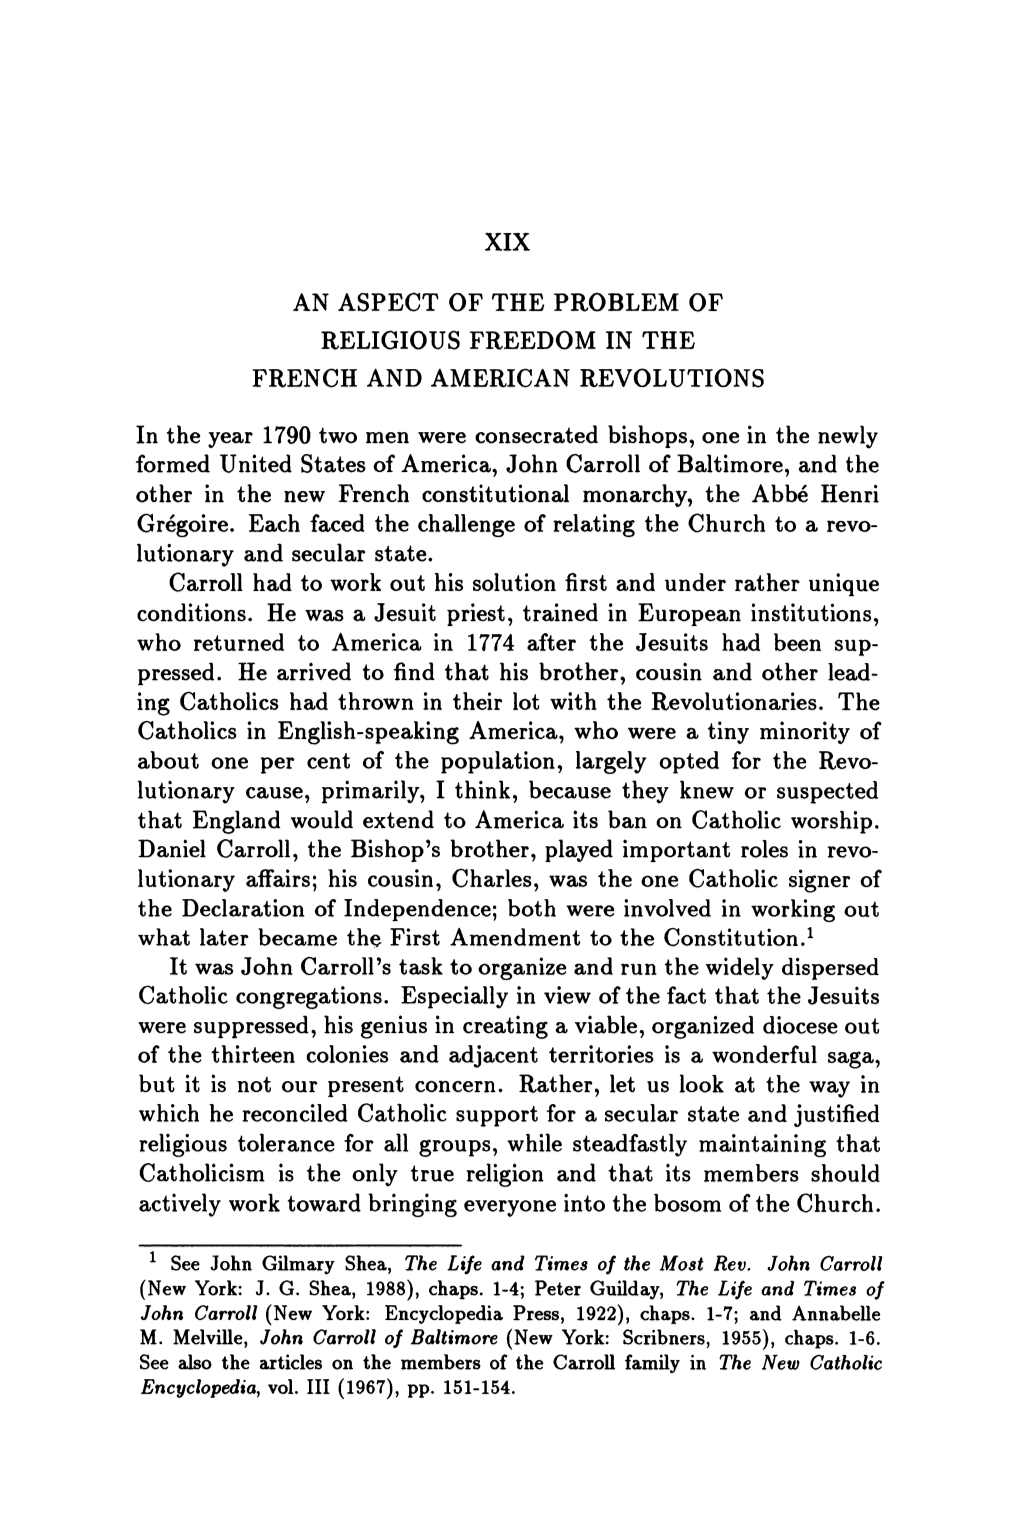 XIX an ASPECT of the PROBLEM of RELIGIOUS FREEDOM in the FRENCH and AMERICAN REVOLUTIONS in the Year 1790 Two Men Were Consecrat